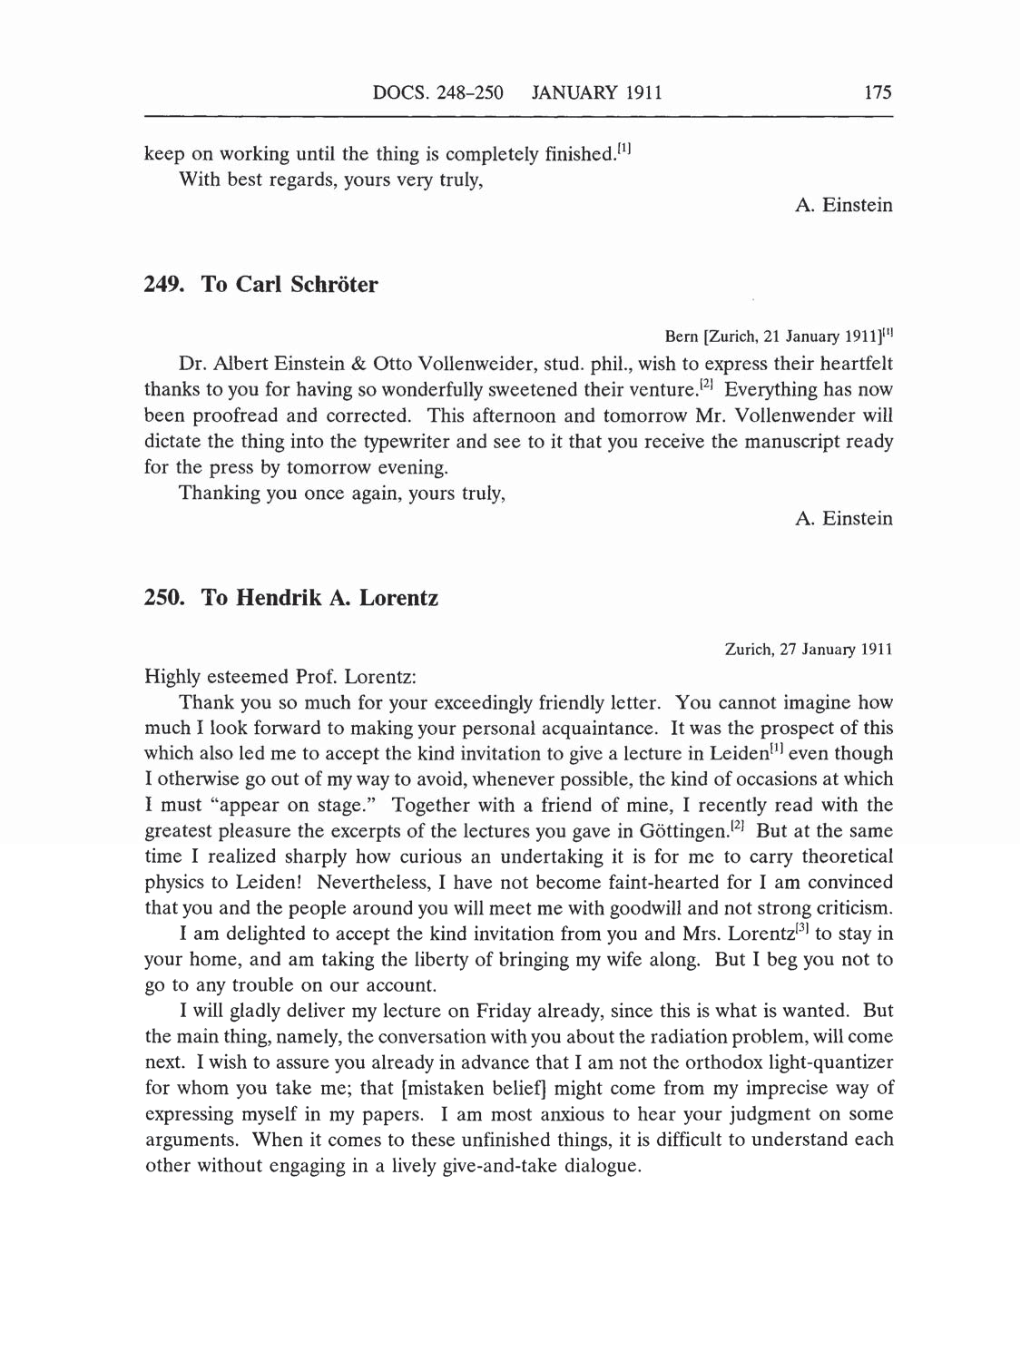 Volume 5: The Swiss Years: Correspondence, 1902-1914 (English translation supplement) page 175